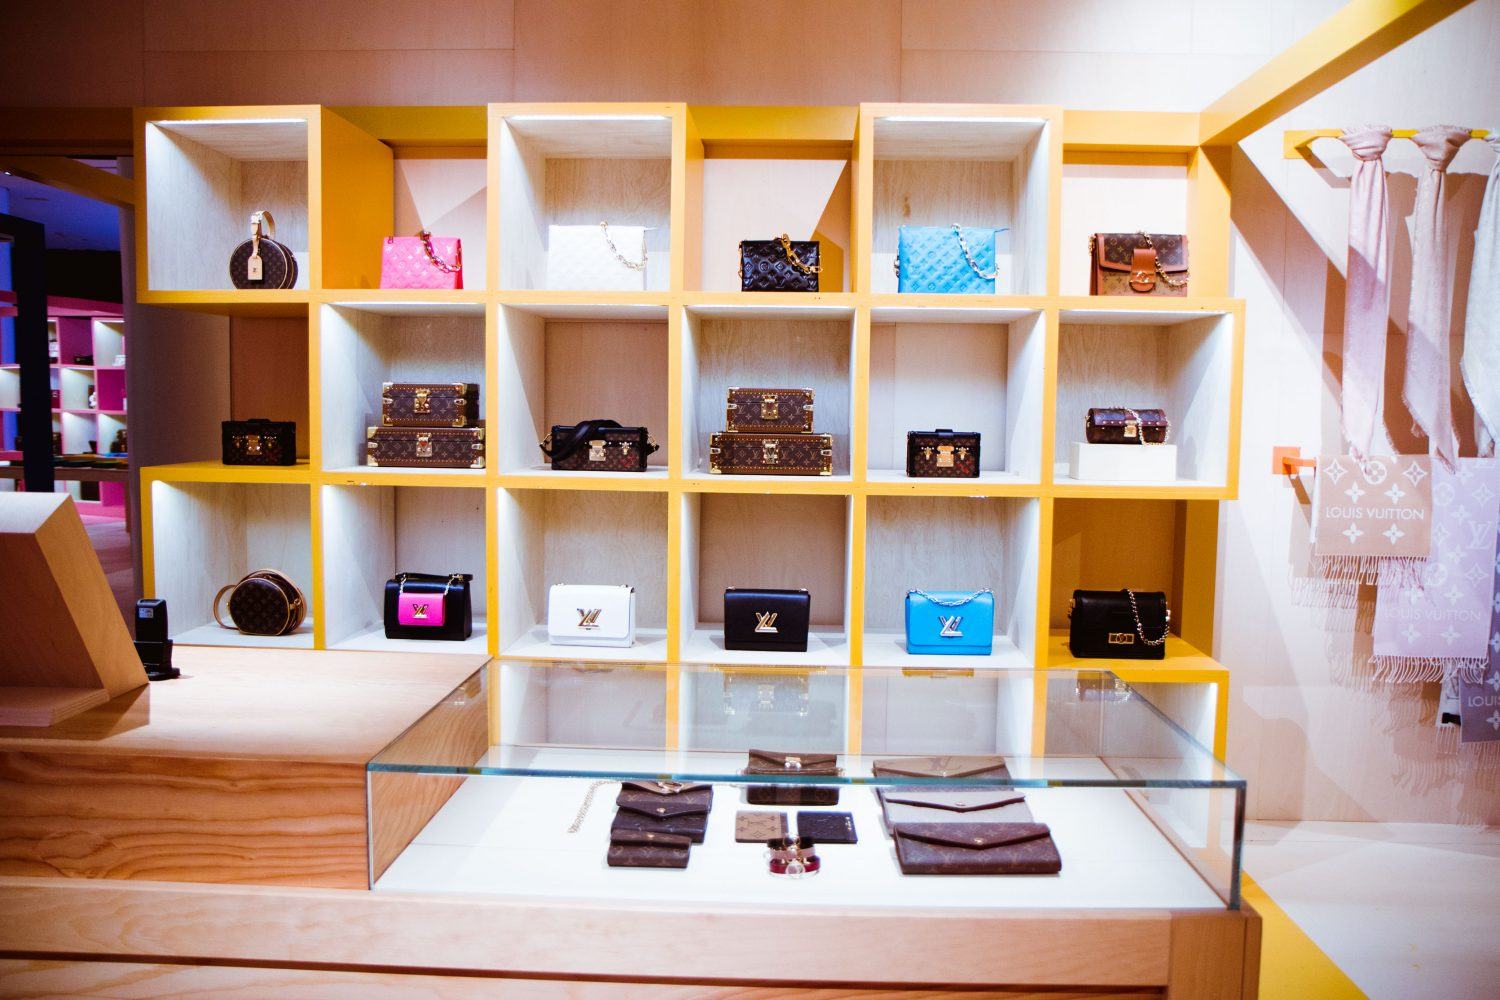 Louis Vuitton's exhibit of celeb-designed trunks lands in NYC